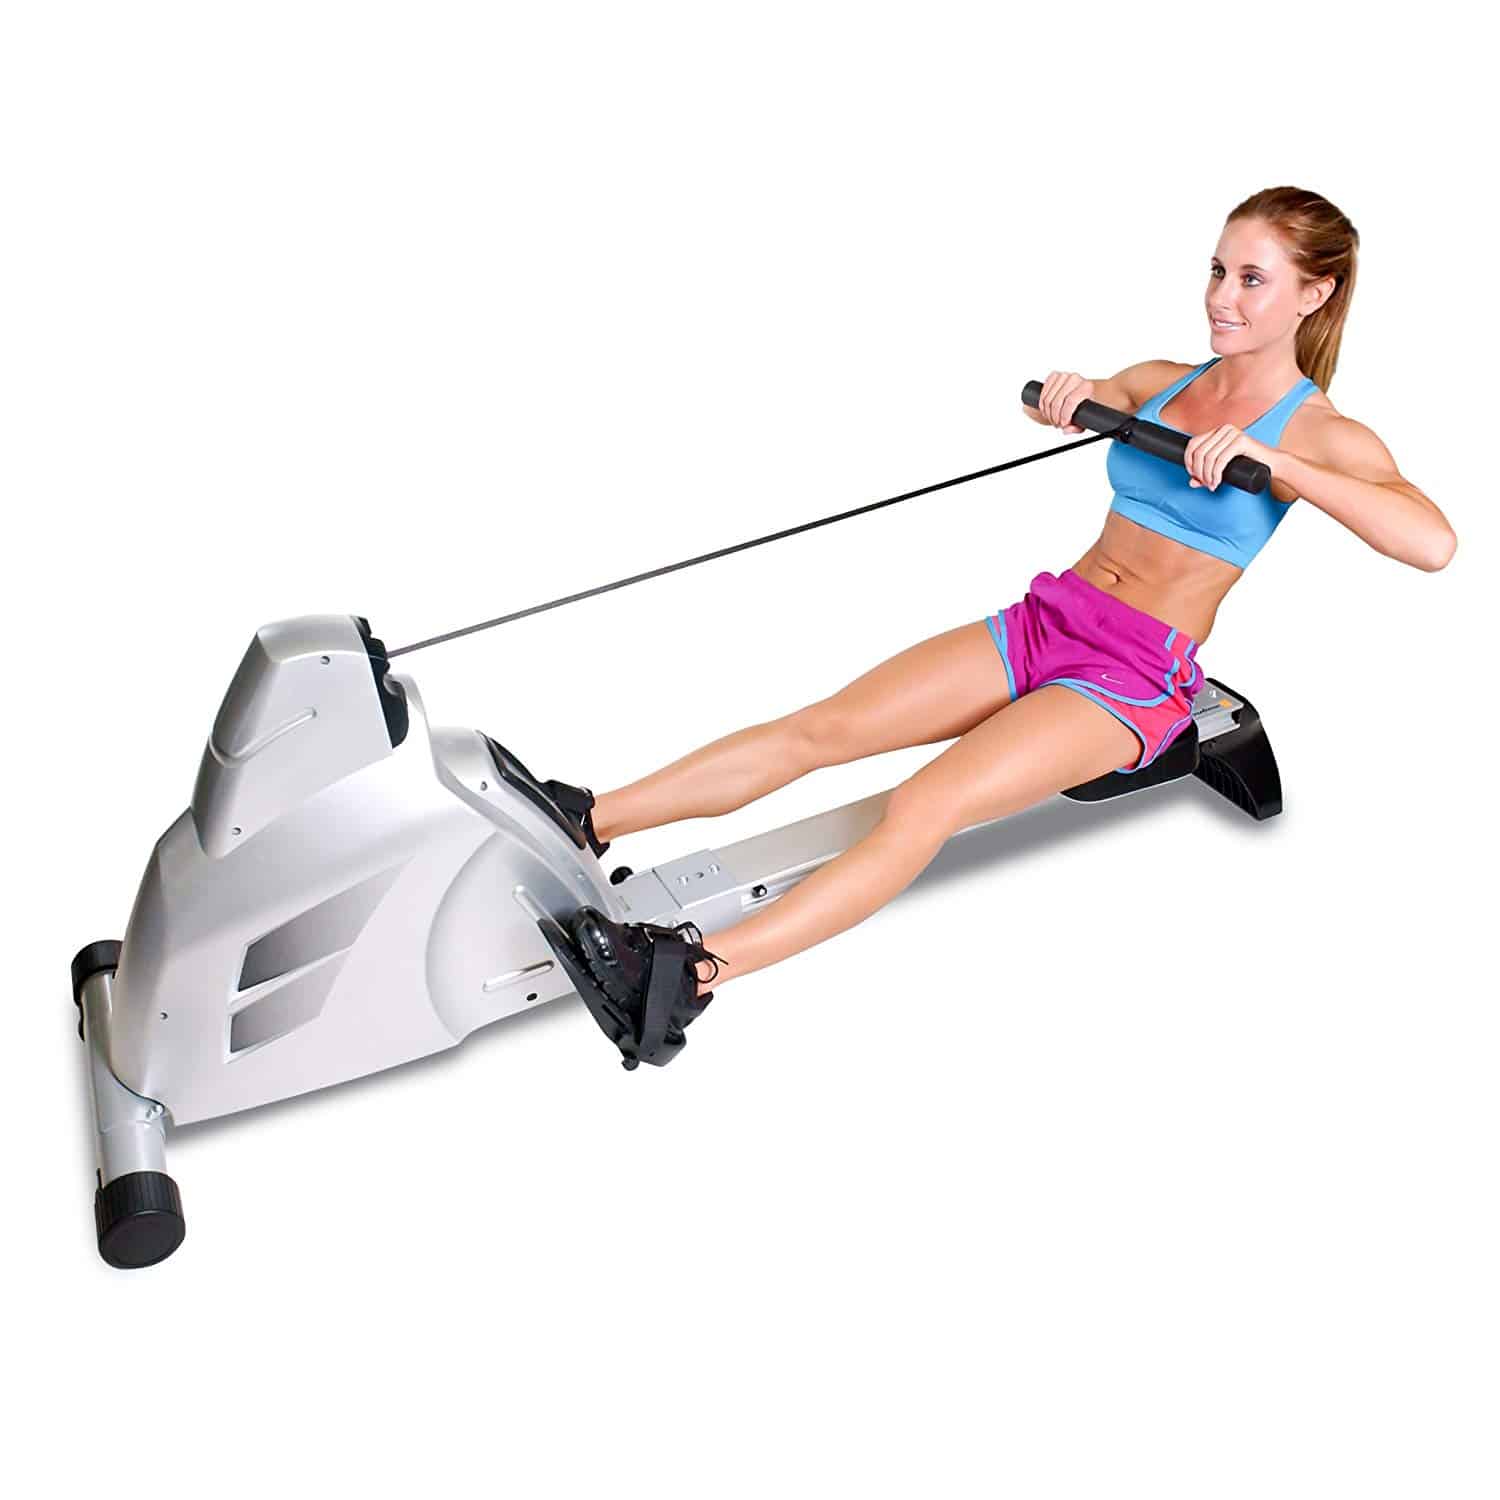 rowing machine for beginners